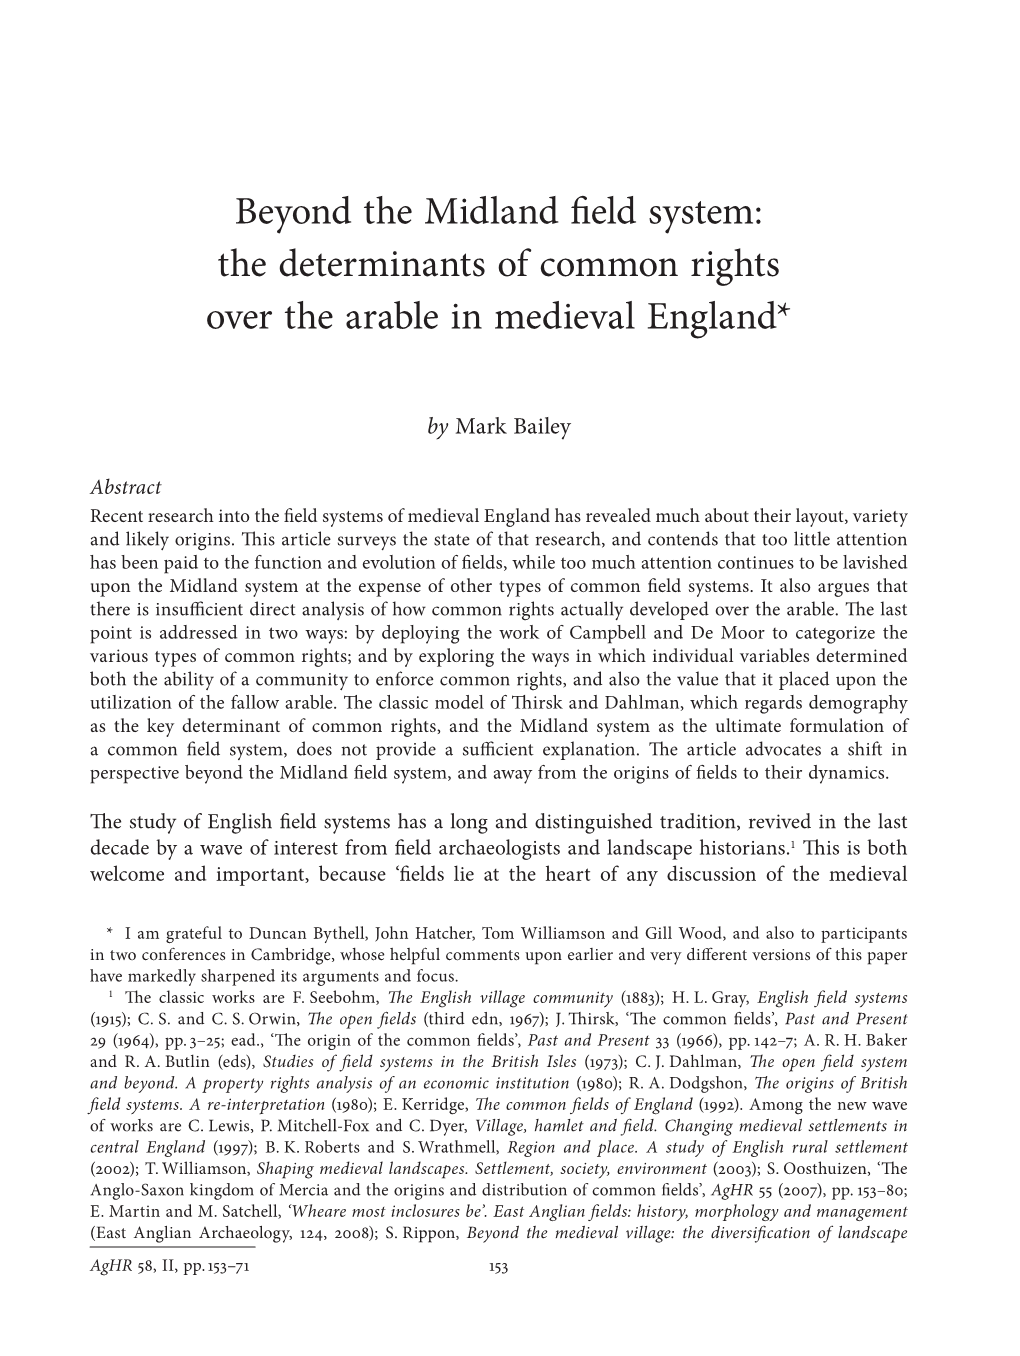 Beyond the Midland Field System. the Determinants of Common Rights Over the Arable in Medieval England